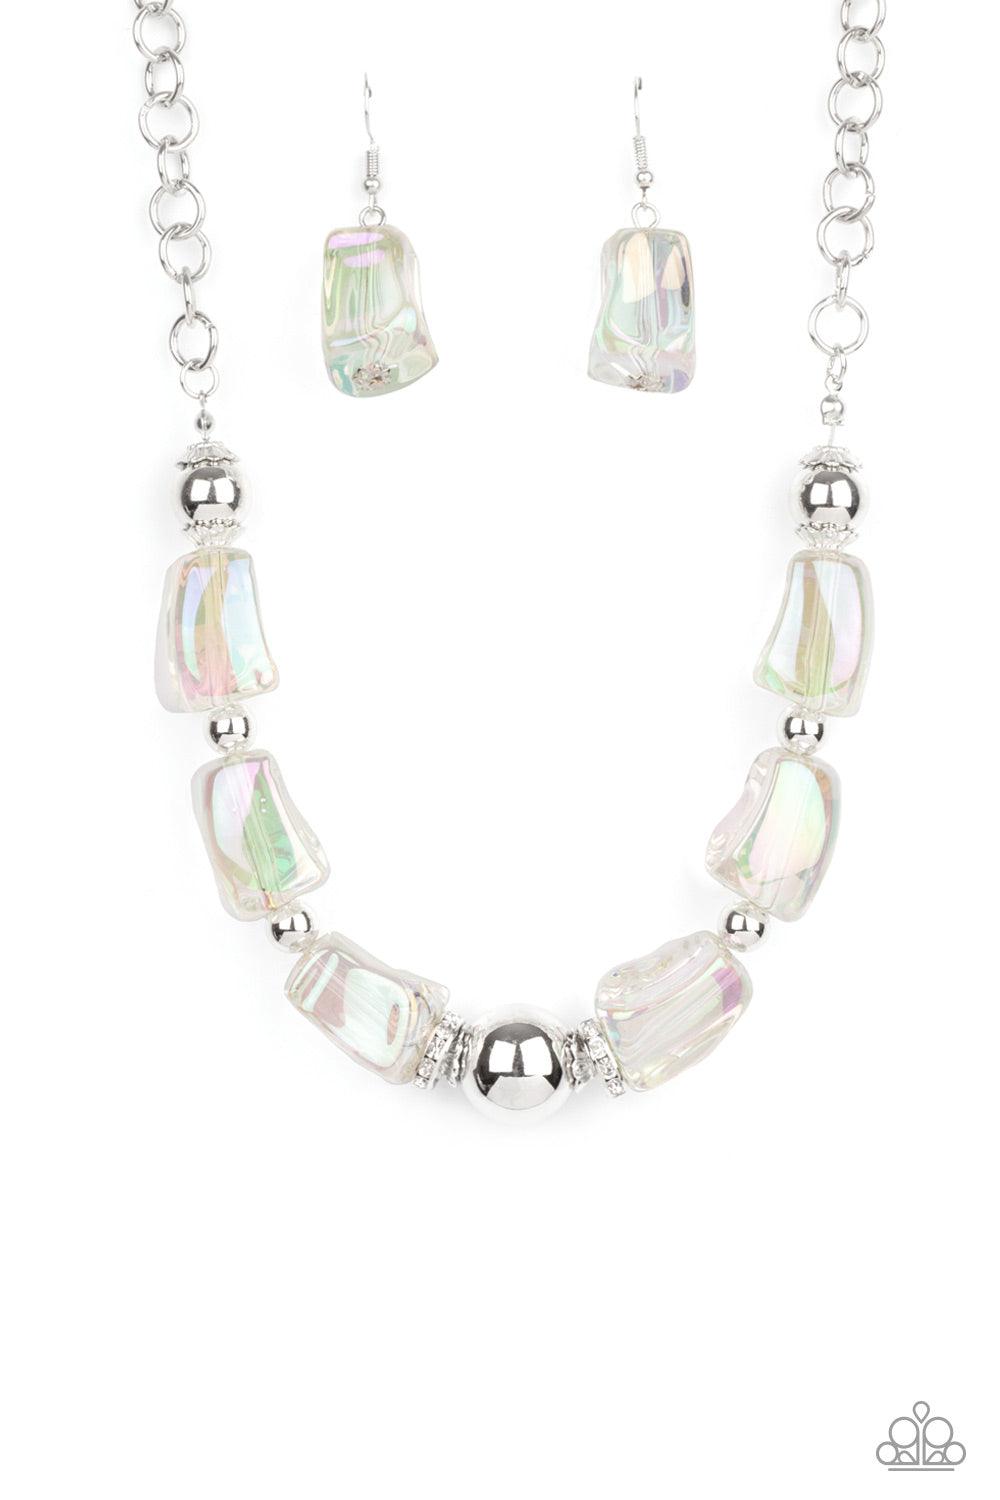 Paparazzi Accessories Iridescently Ice Queen - Multi Featuring an icy iridescence, glassy asymmetrical beads joins a mismatched collection of silver beads, white rhinestone encrusted rings, and scalloped silver accents below the collar. Attached to a silv